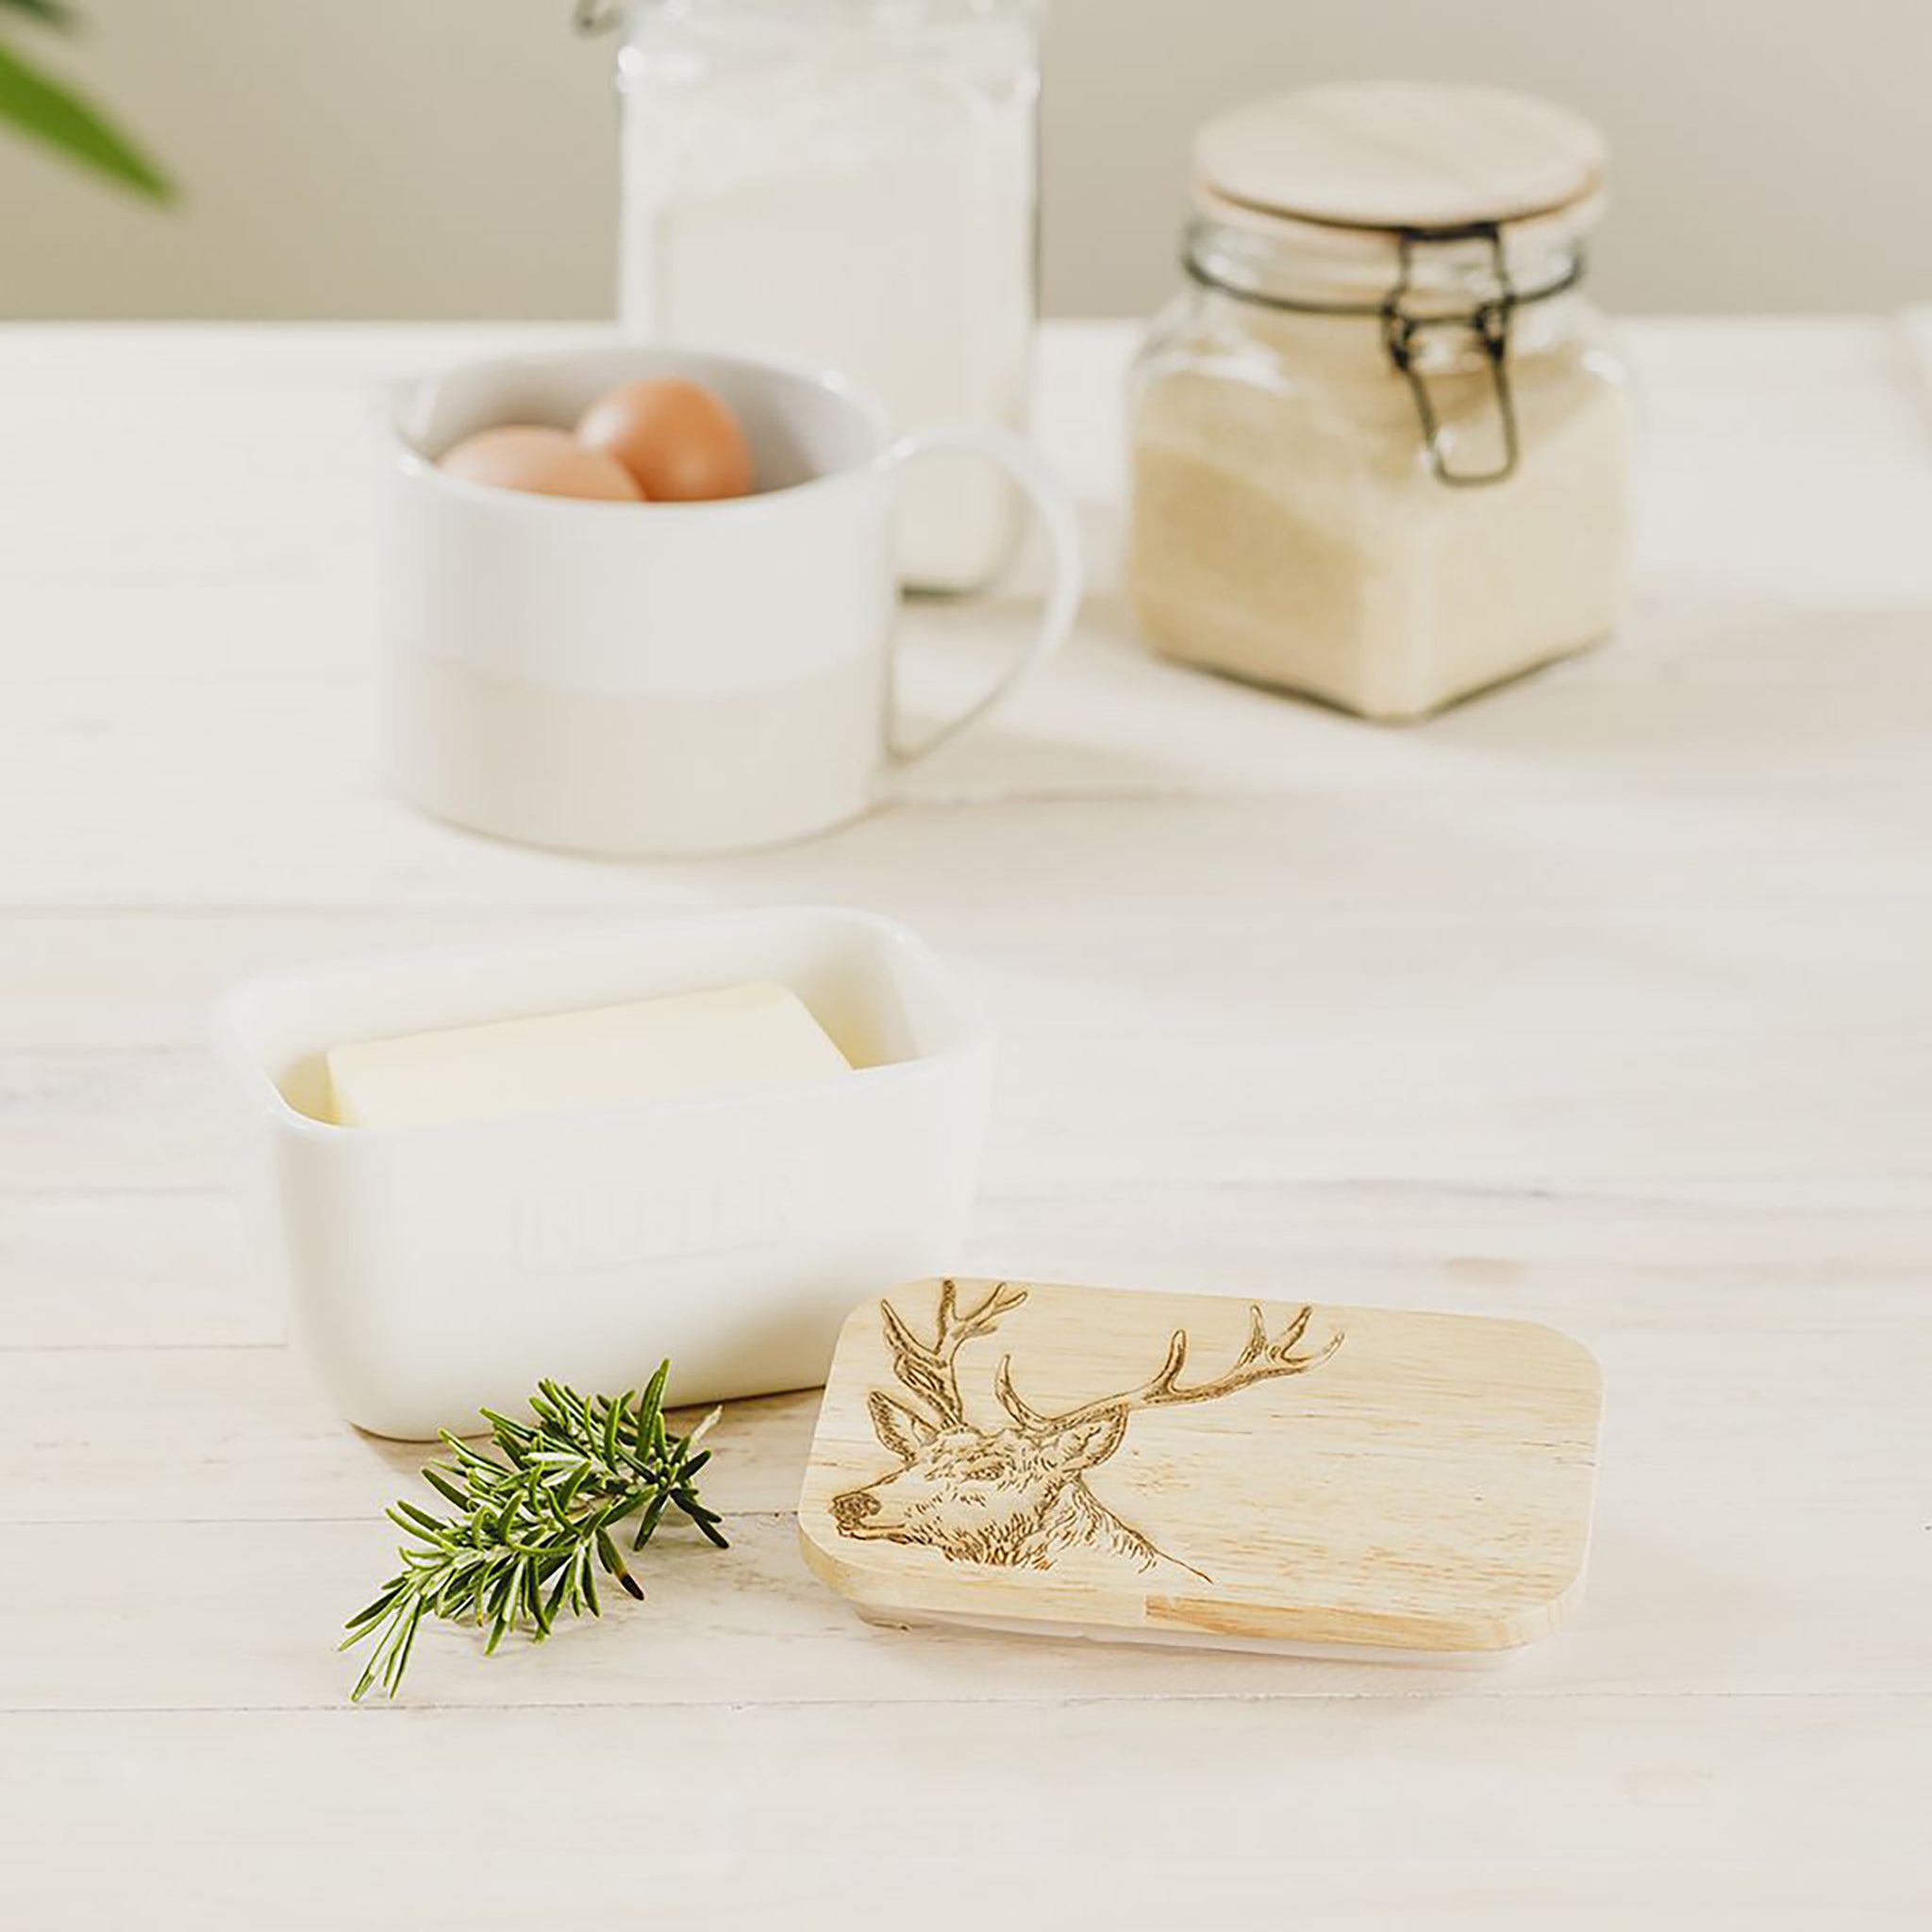 White ceramic butter dish with a wooden lid engraved with a stag staged on a table with butter and rosemary